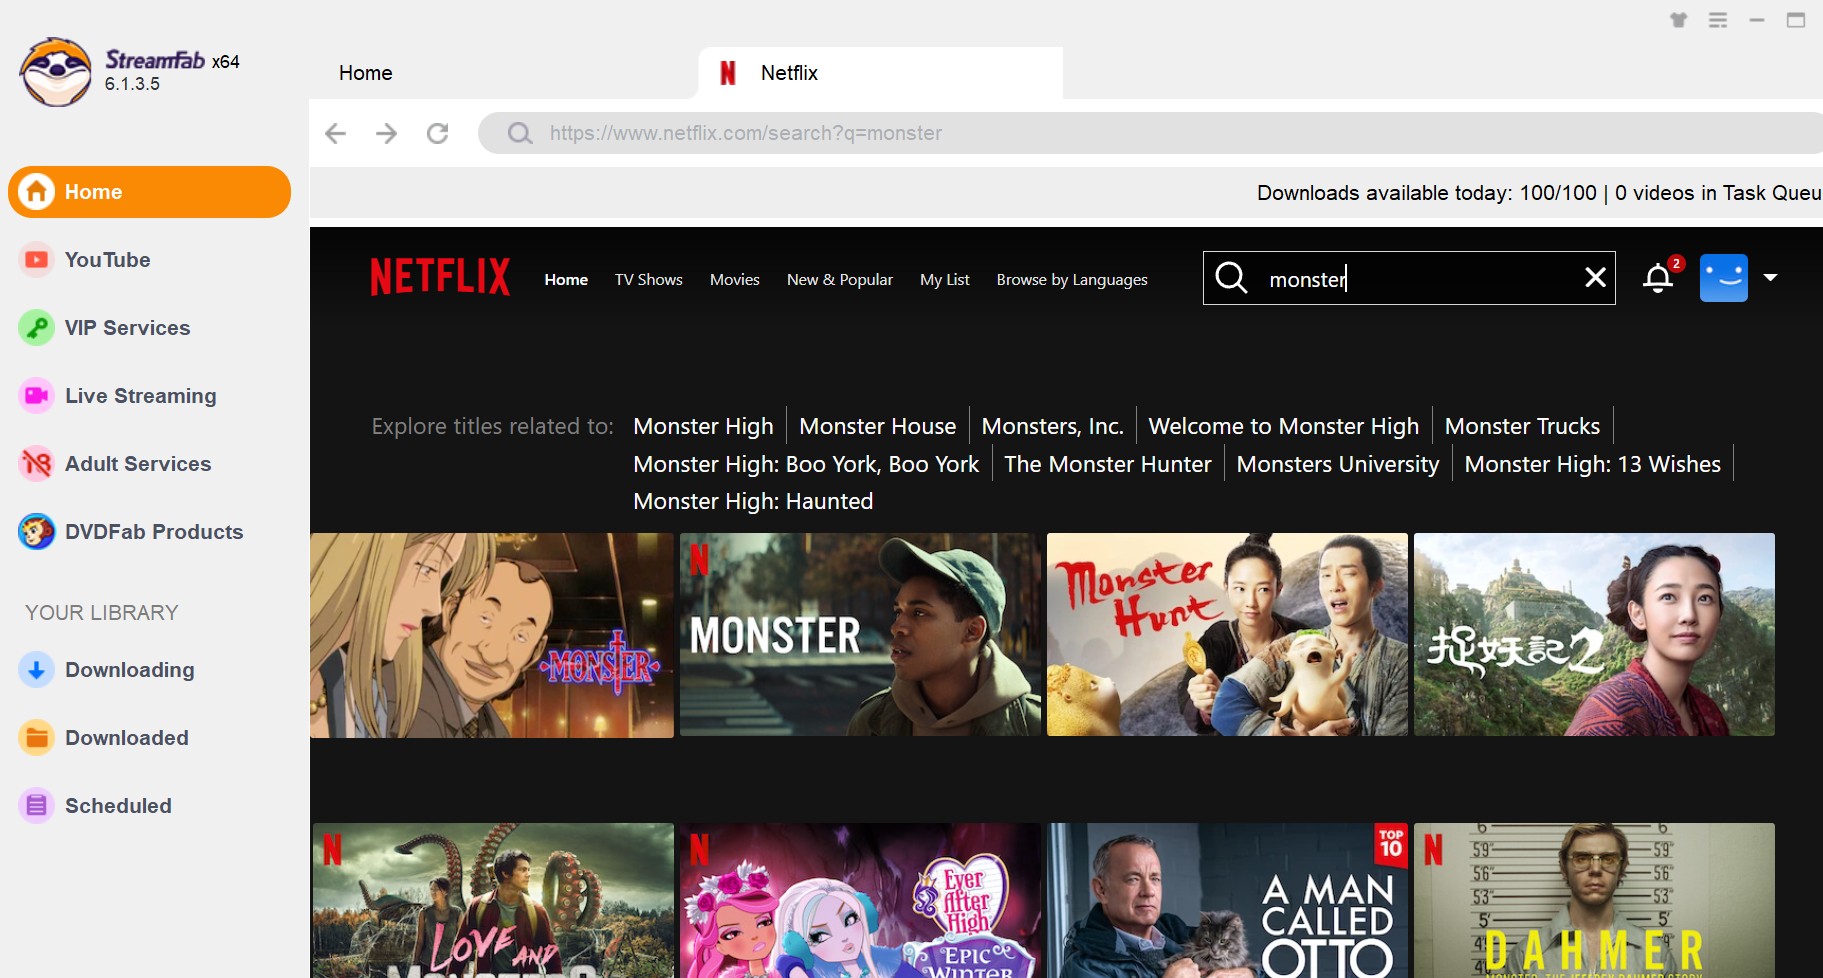 Where To Watch Monster Anime? Amazon, Funimation Or Netflix?